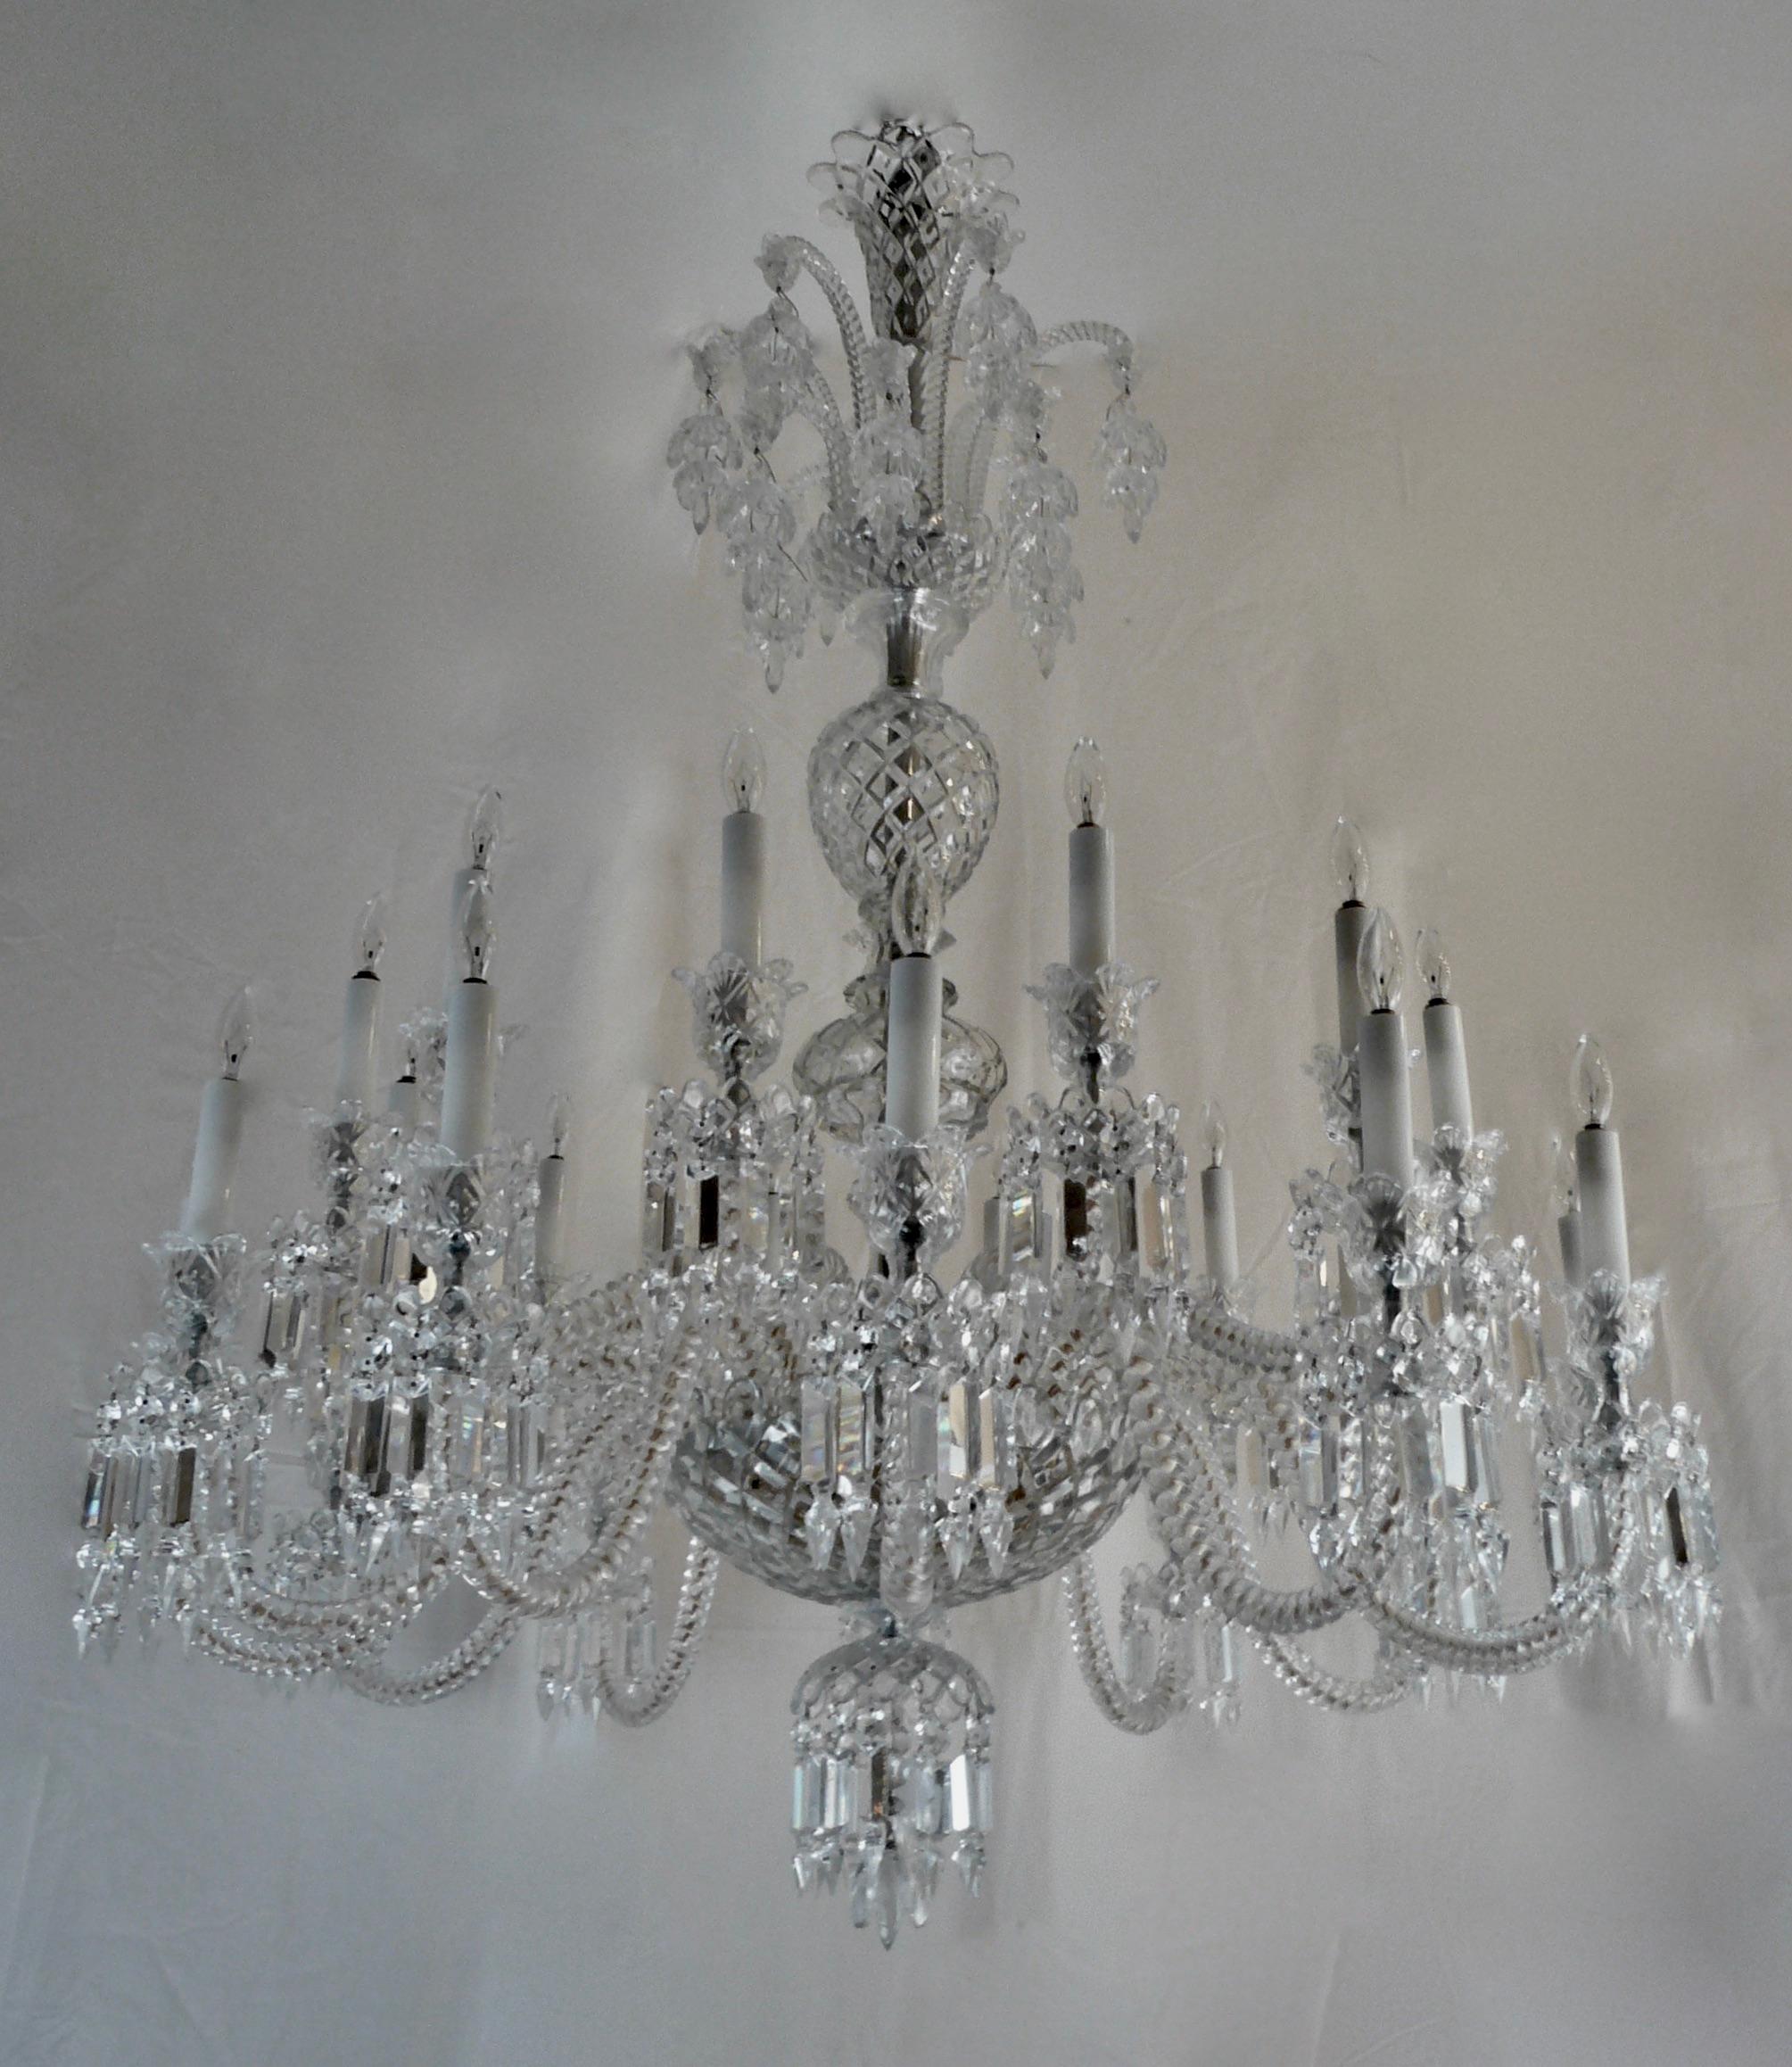 This Impressive chandelier by the renown maker Baccarat features two tiers of arms, baluster form stem, and a corona with hanging crystal fuchsia blossoms.
This chandelier is in excellent condition, and easily disassembles for shipping.